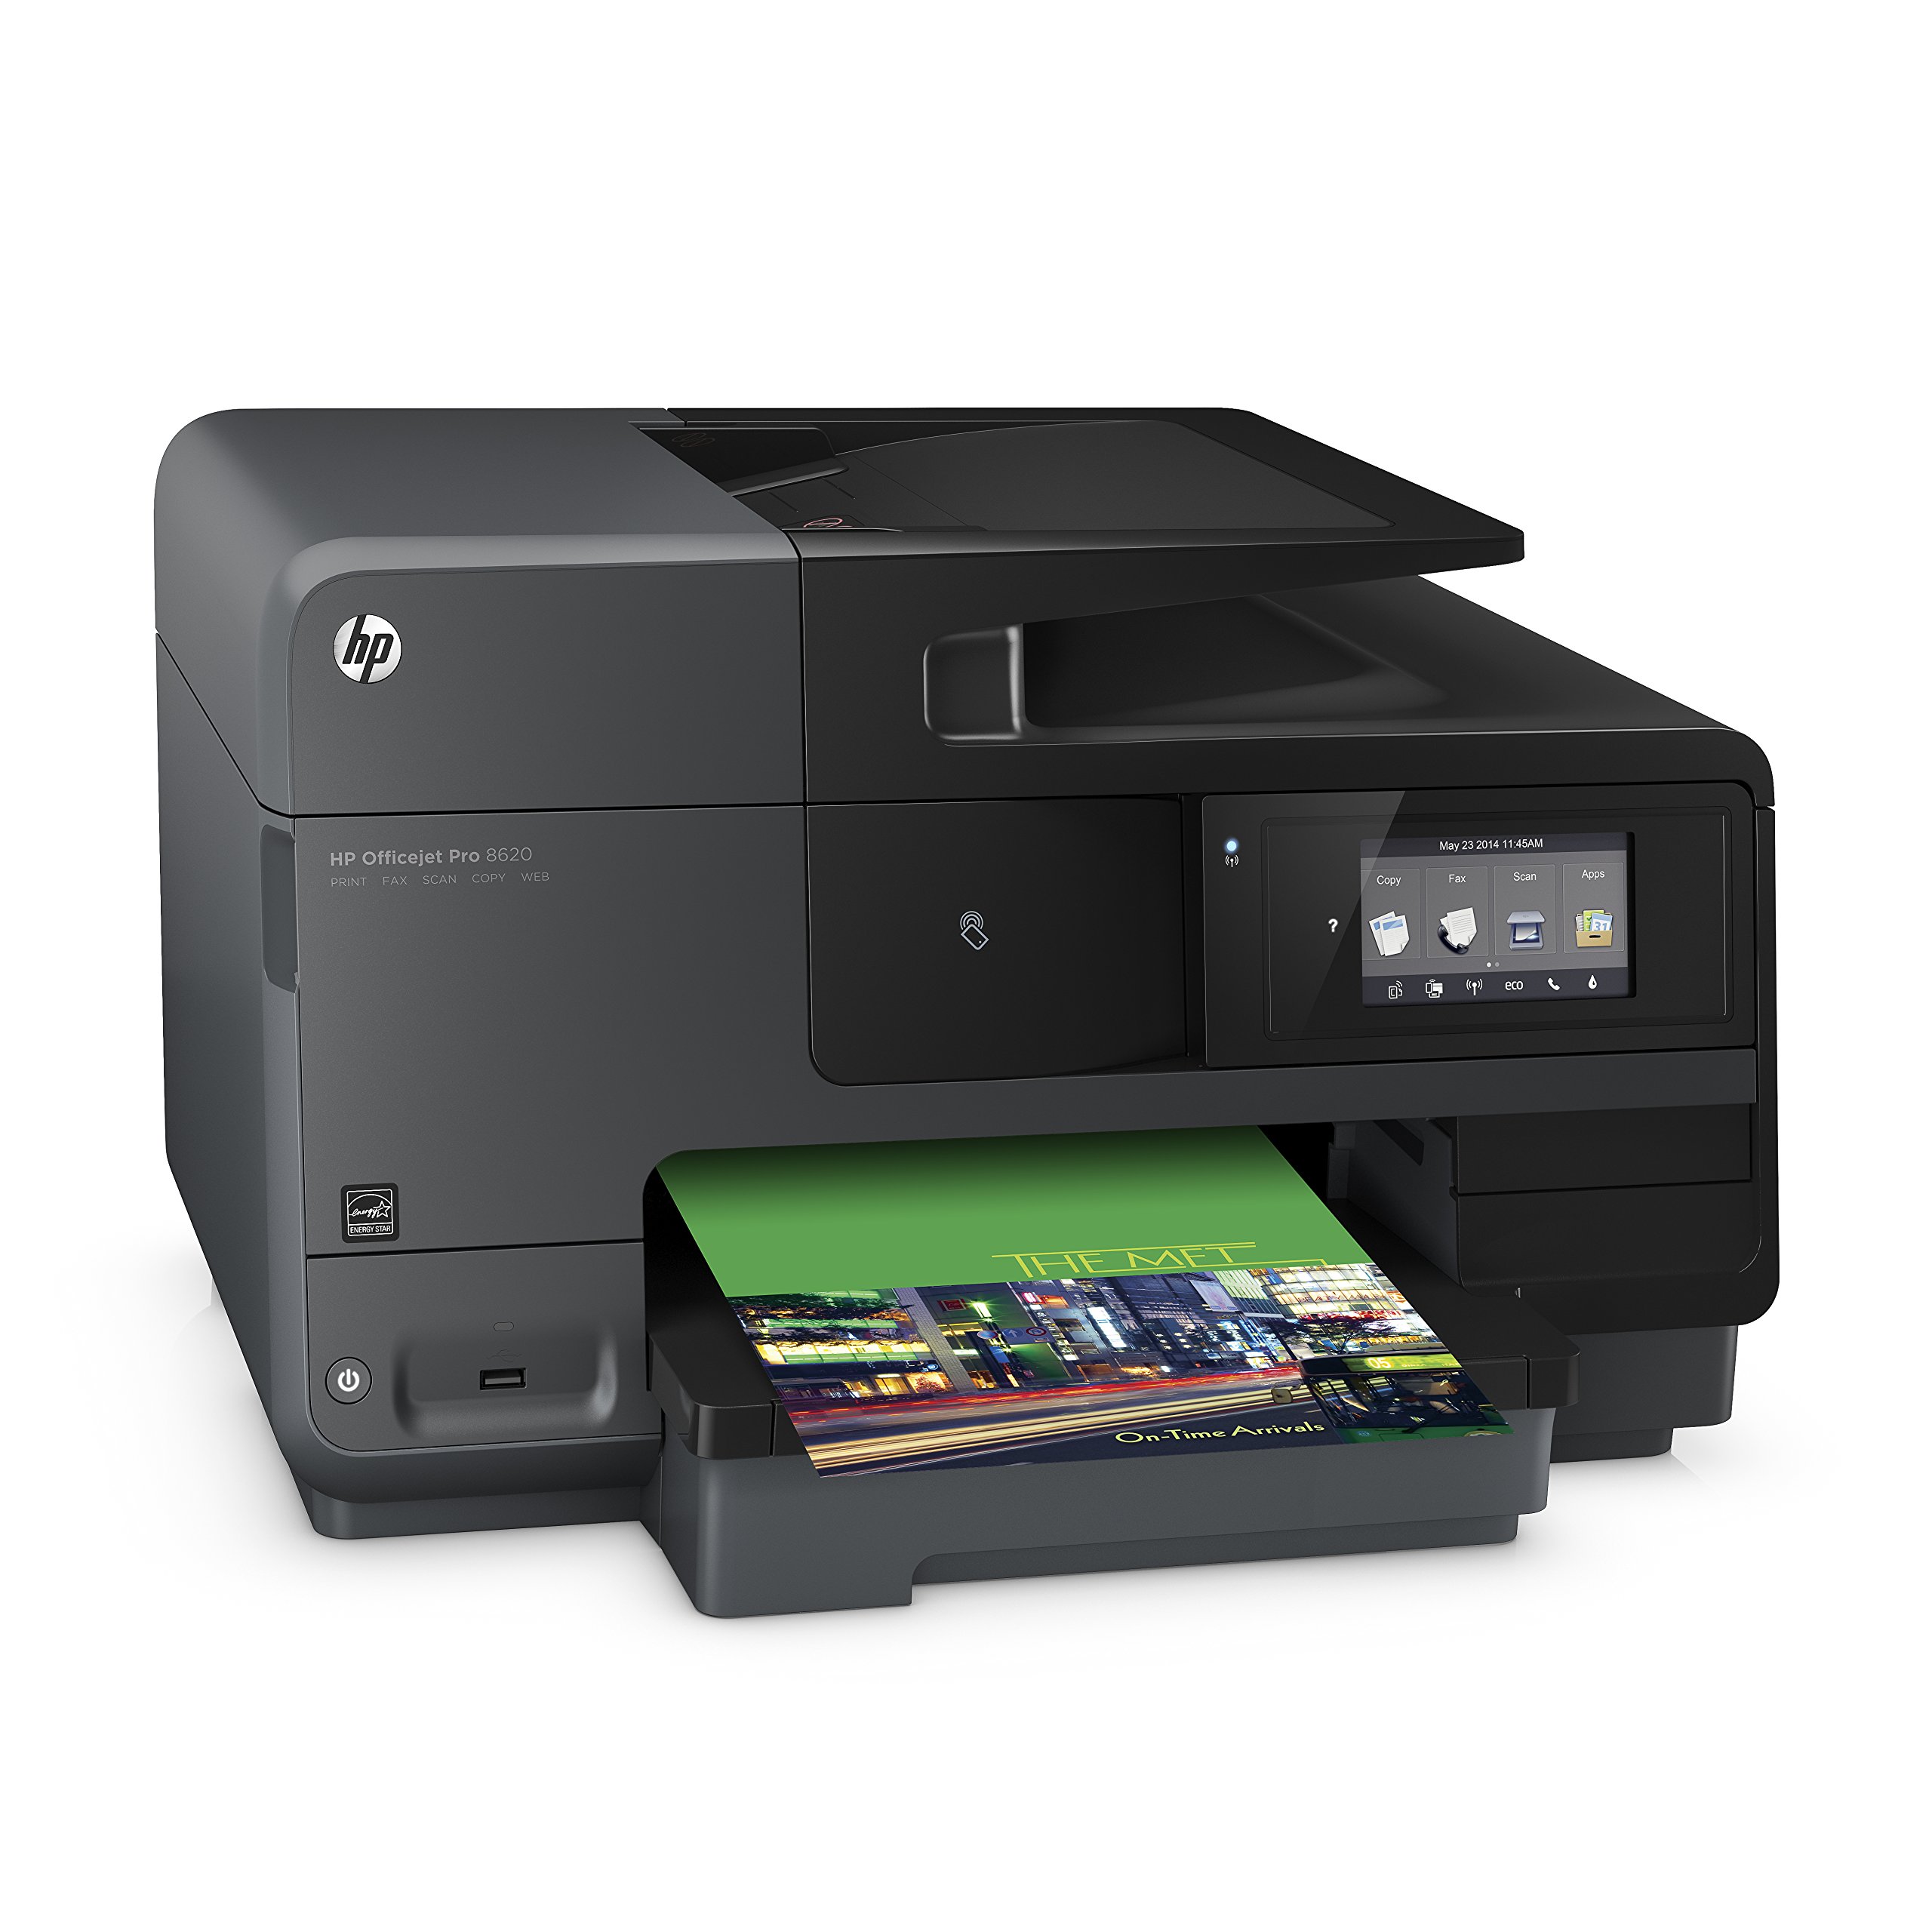 Officejet Pro 8630 e-All-in-One Printer series